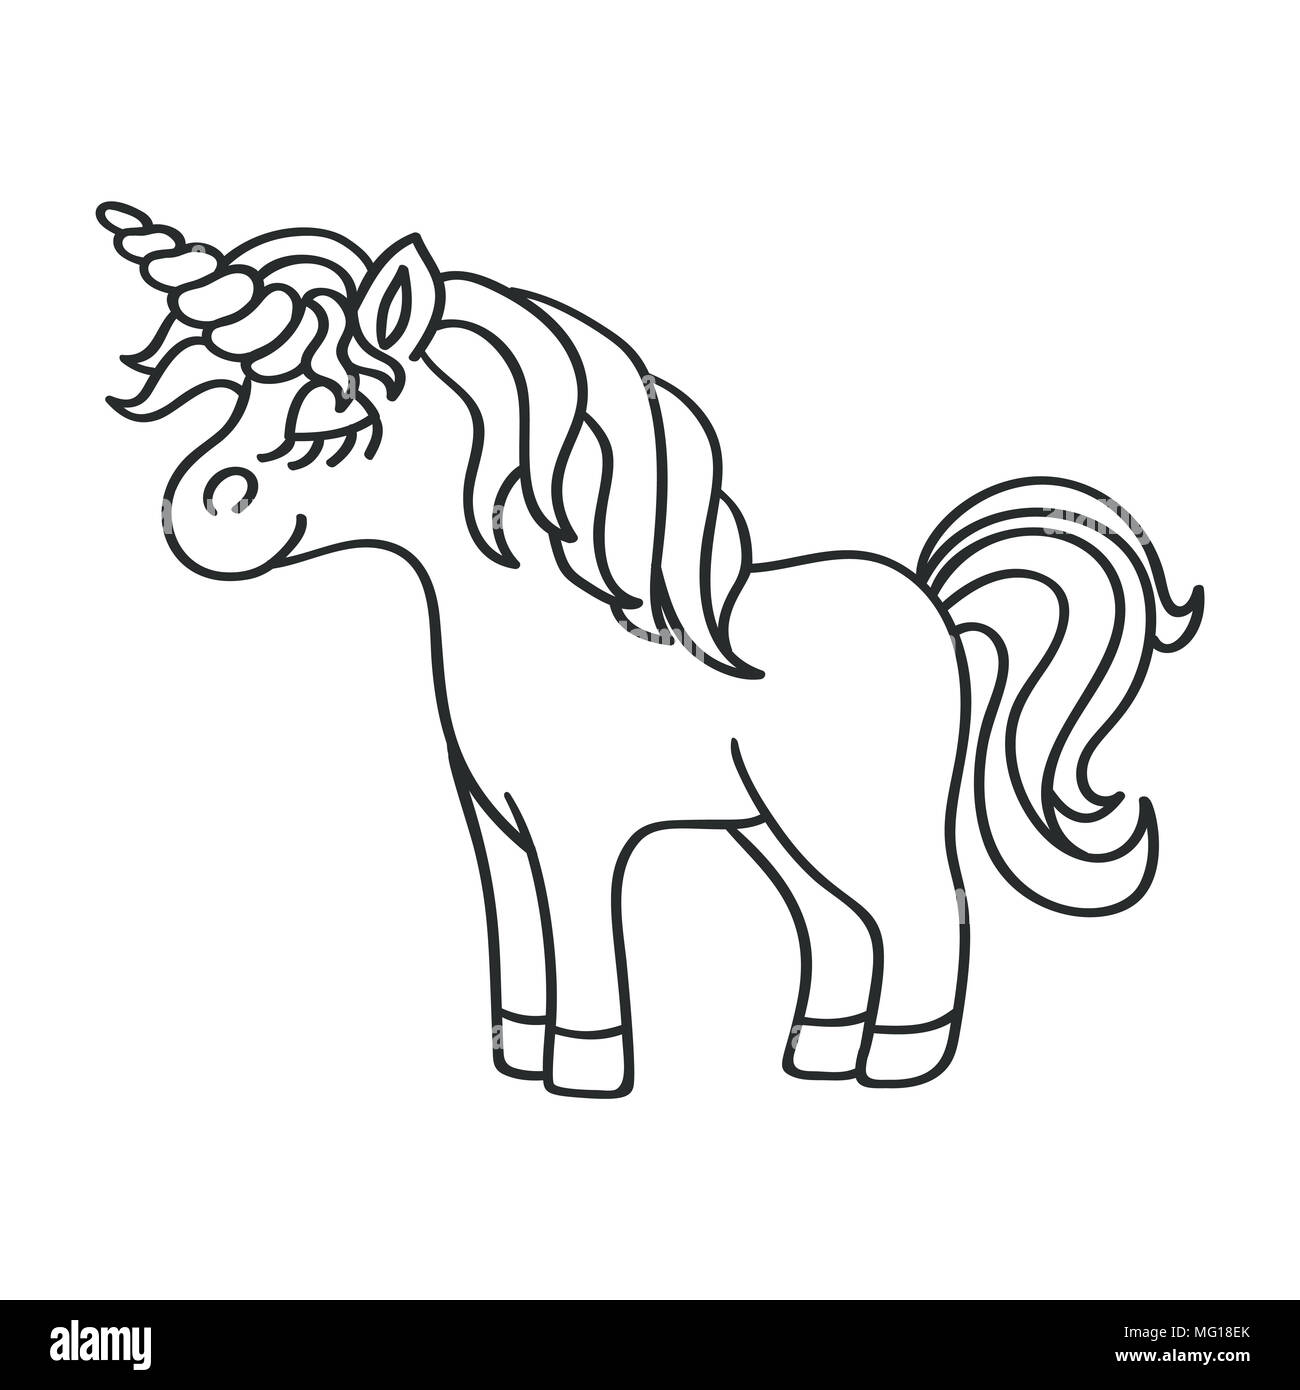 Over the Rainbow | Unicorn Outline Drawing in Black & White